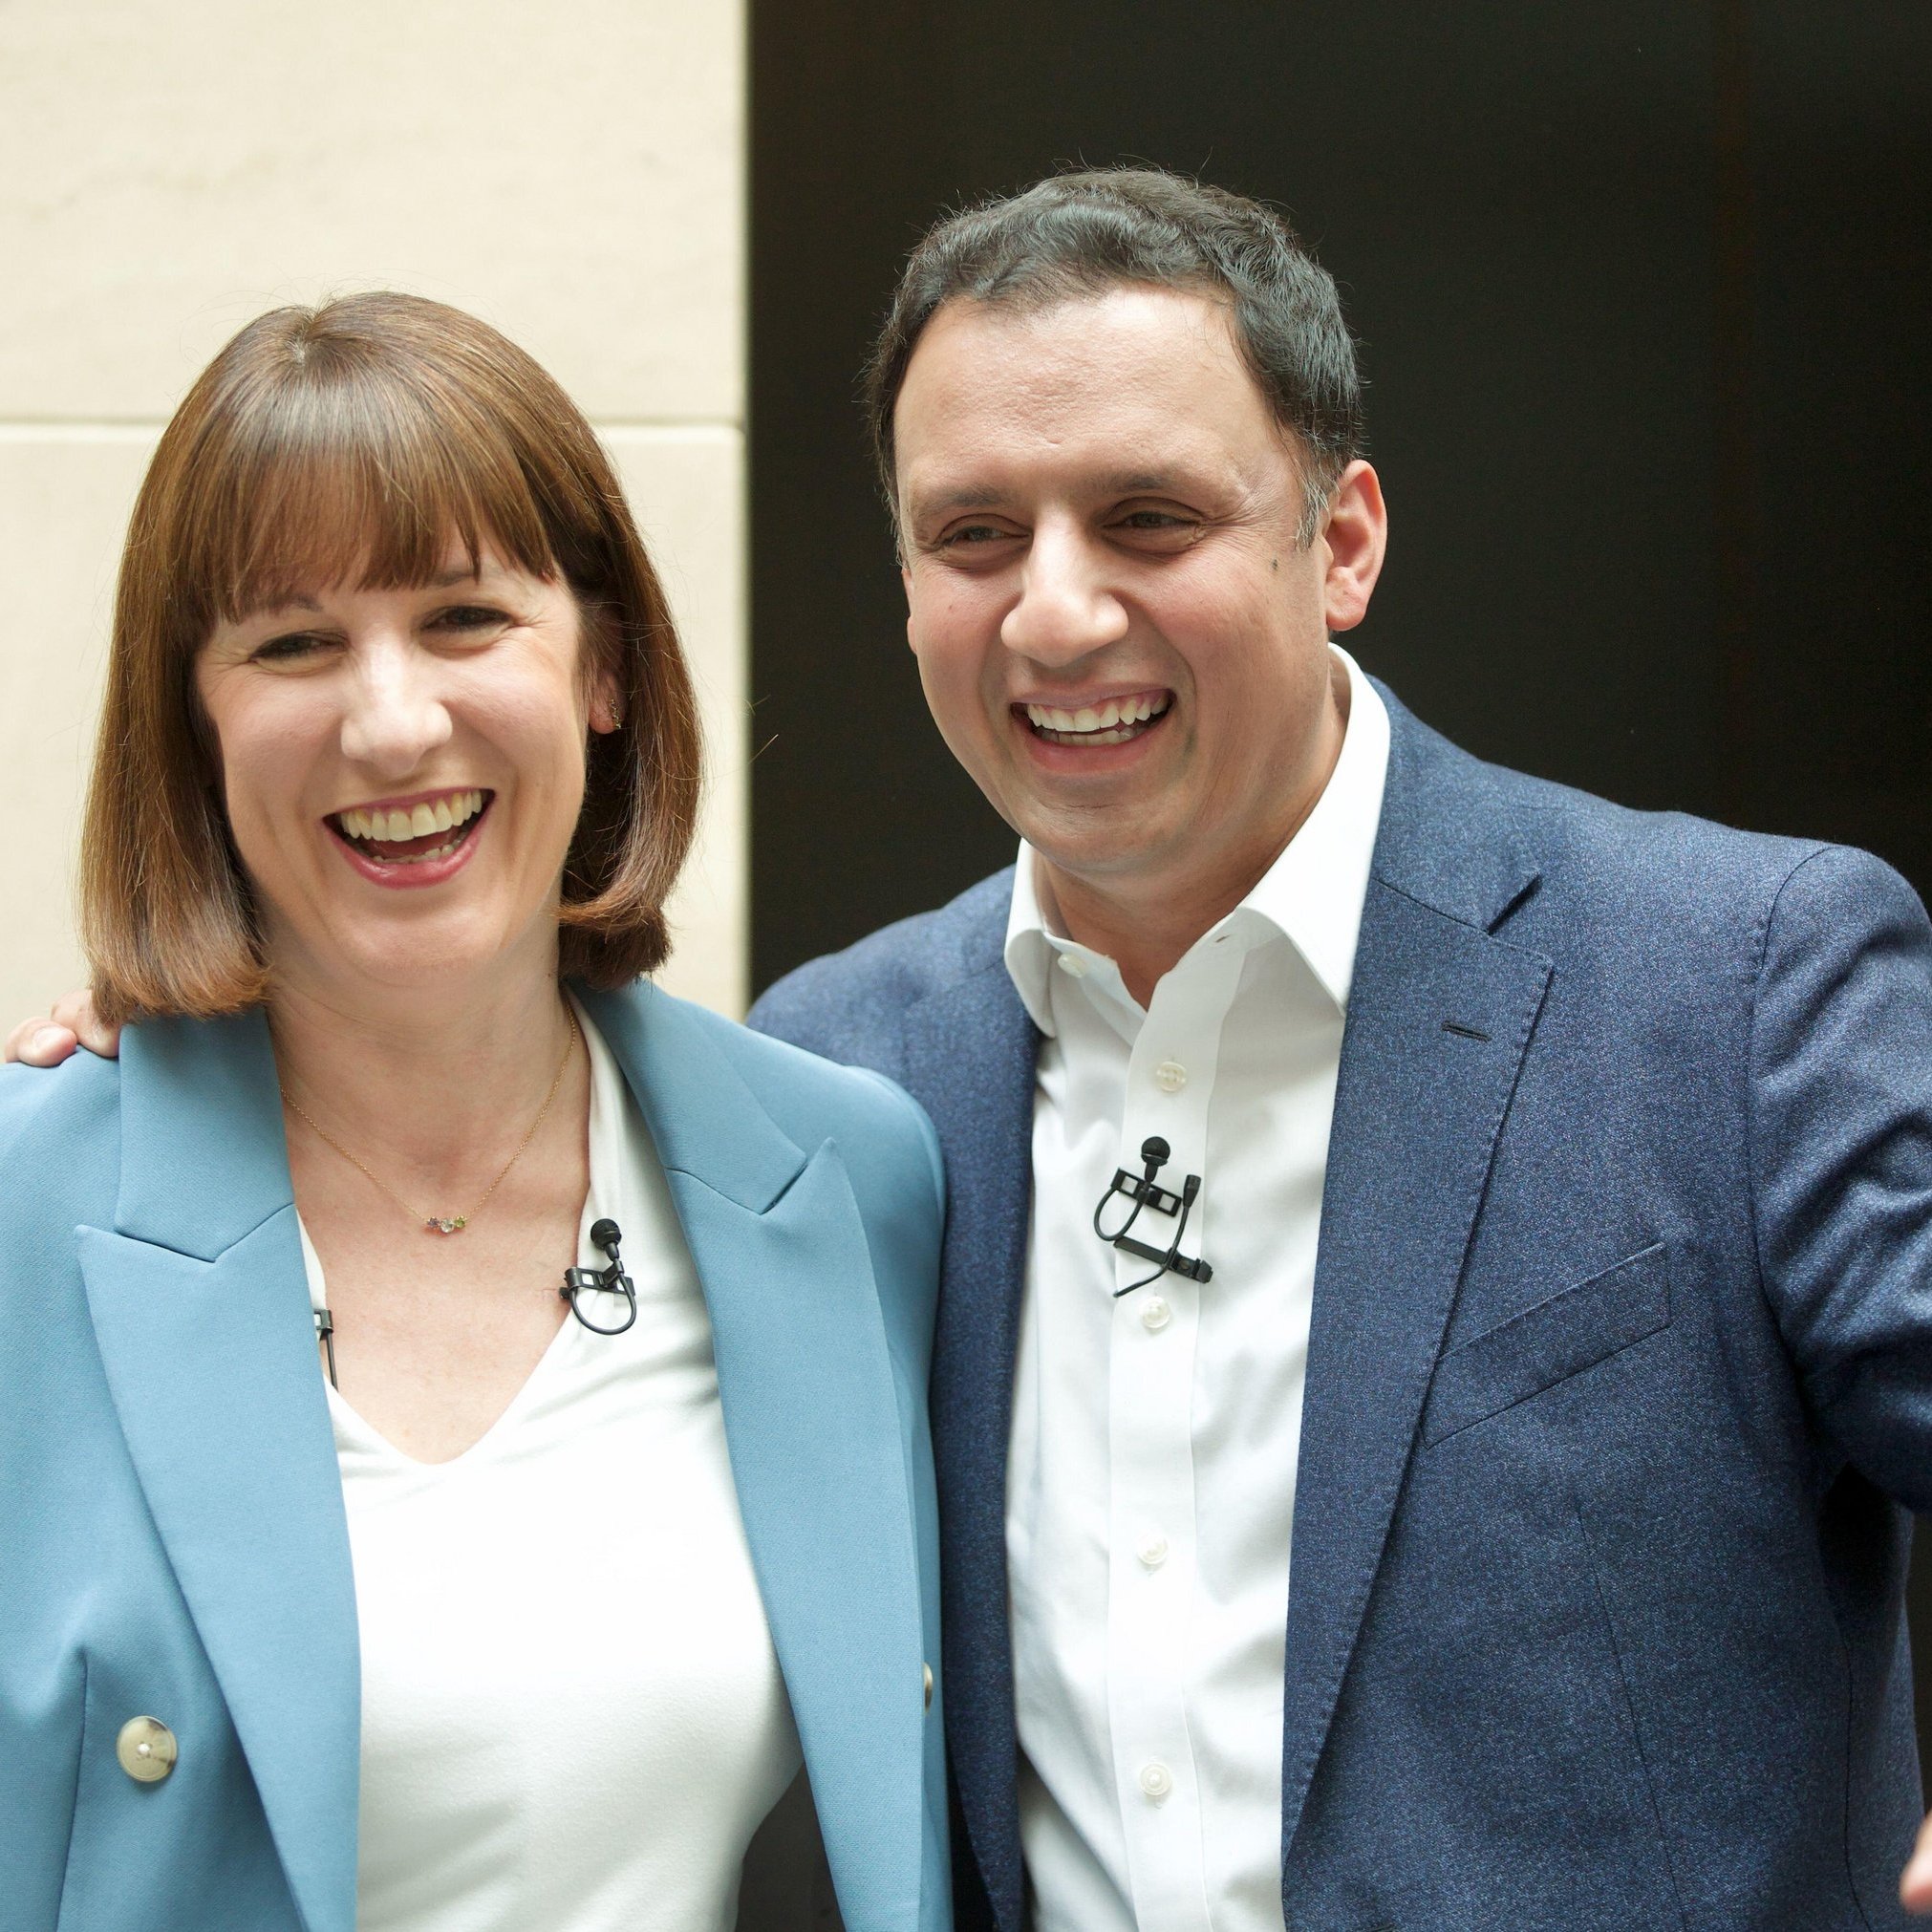 Rachel Reeves and Anas Sarwar visited RBS headquarters in Edinburgh on Tuesday to discuss Labour’s economic agenda